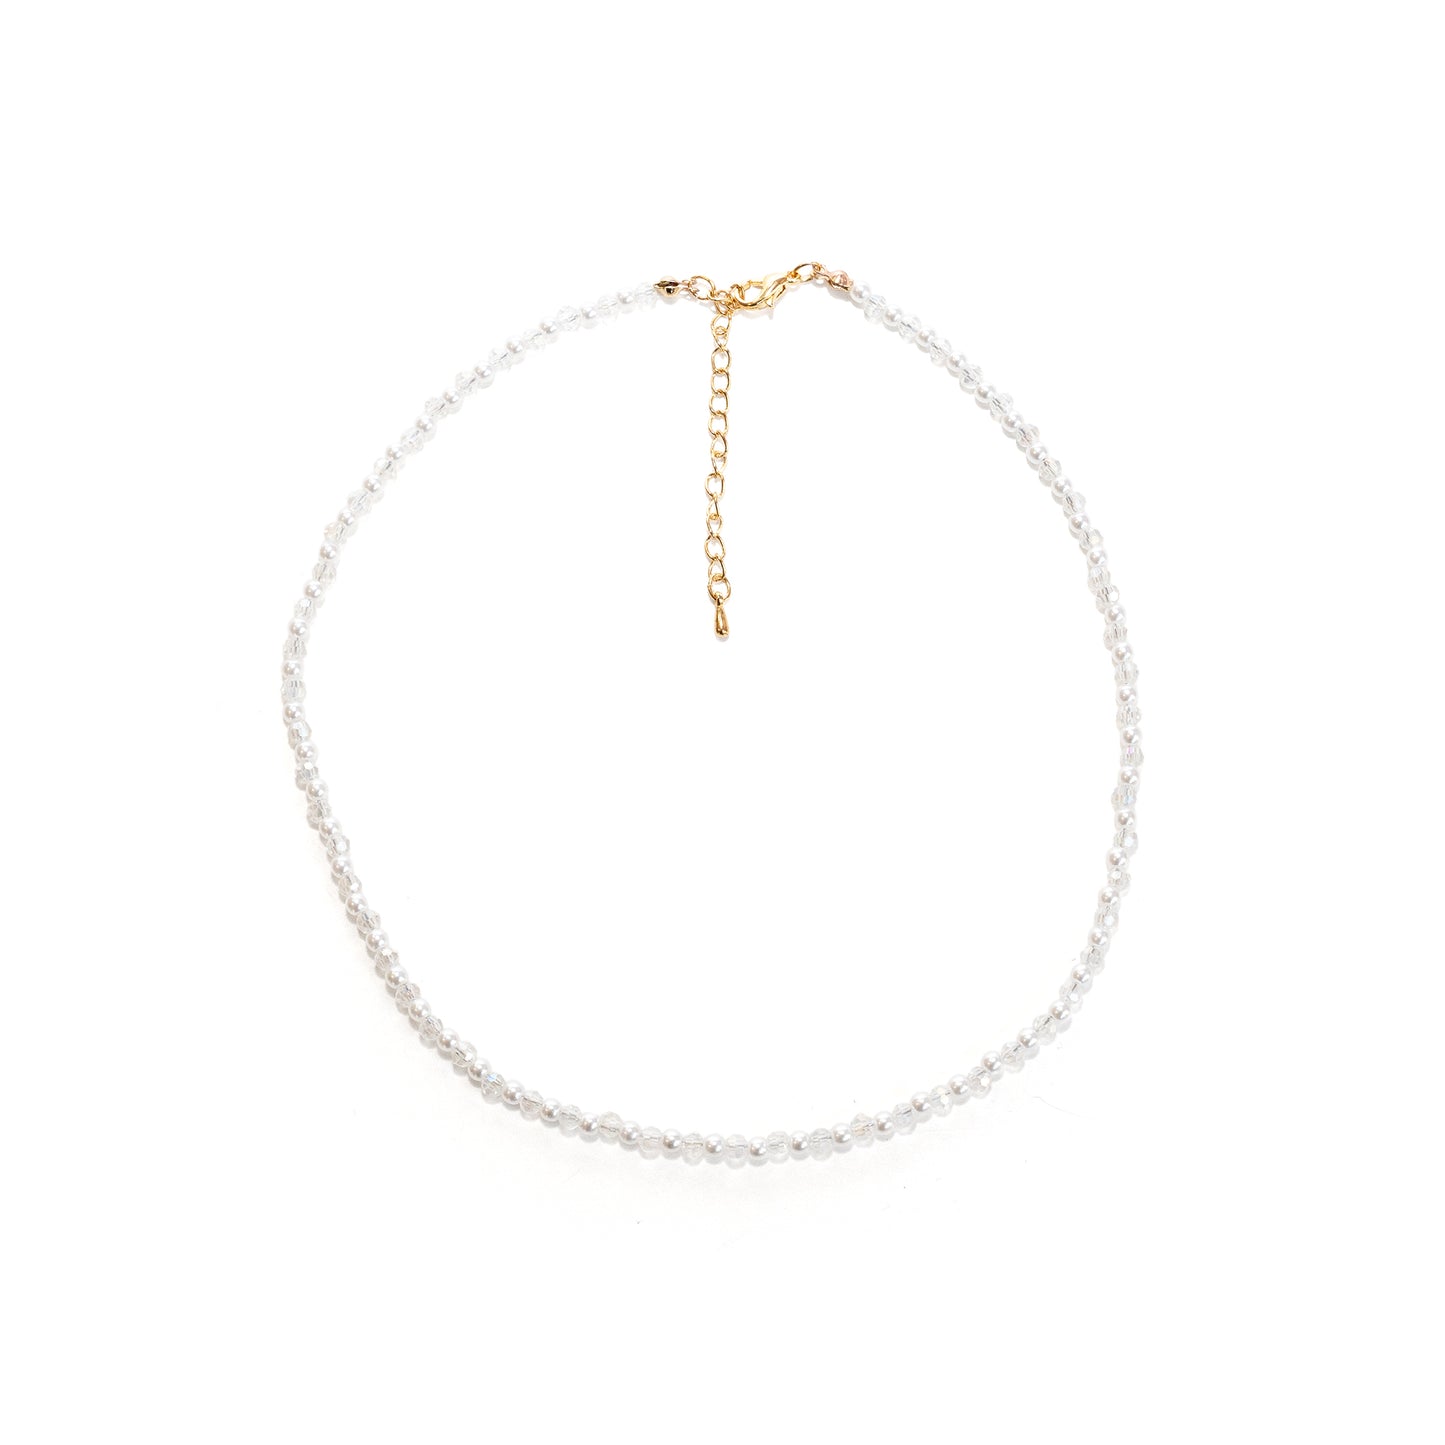 Petite Fresh Water Pearl & Bead Necklace